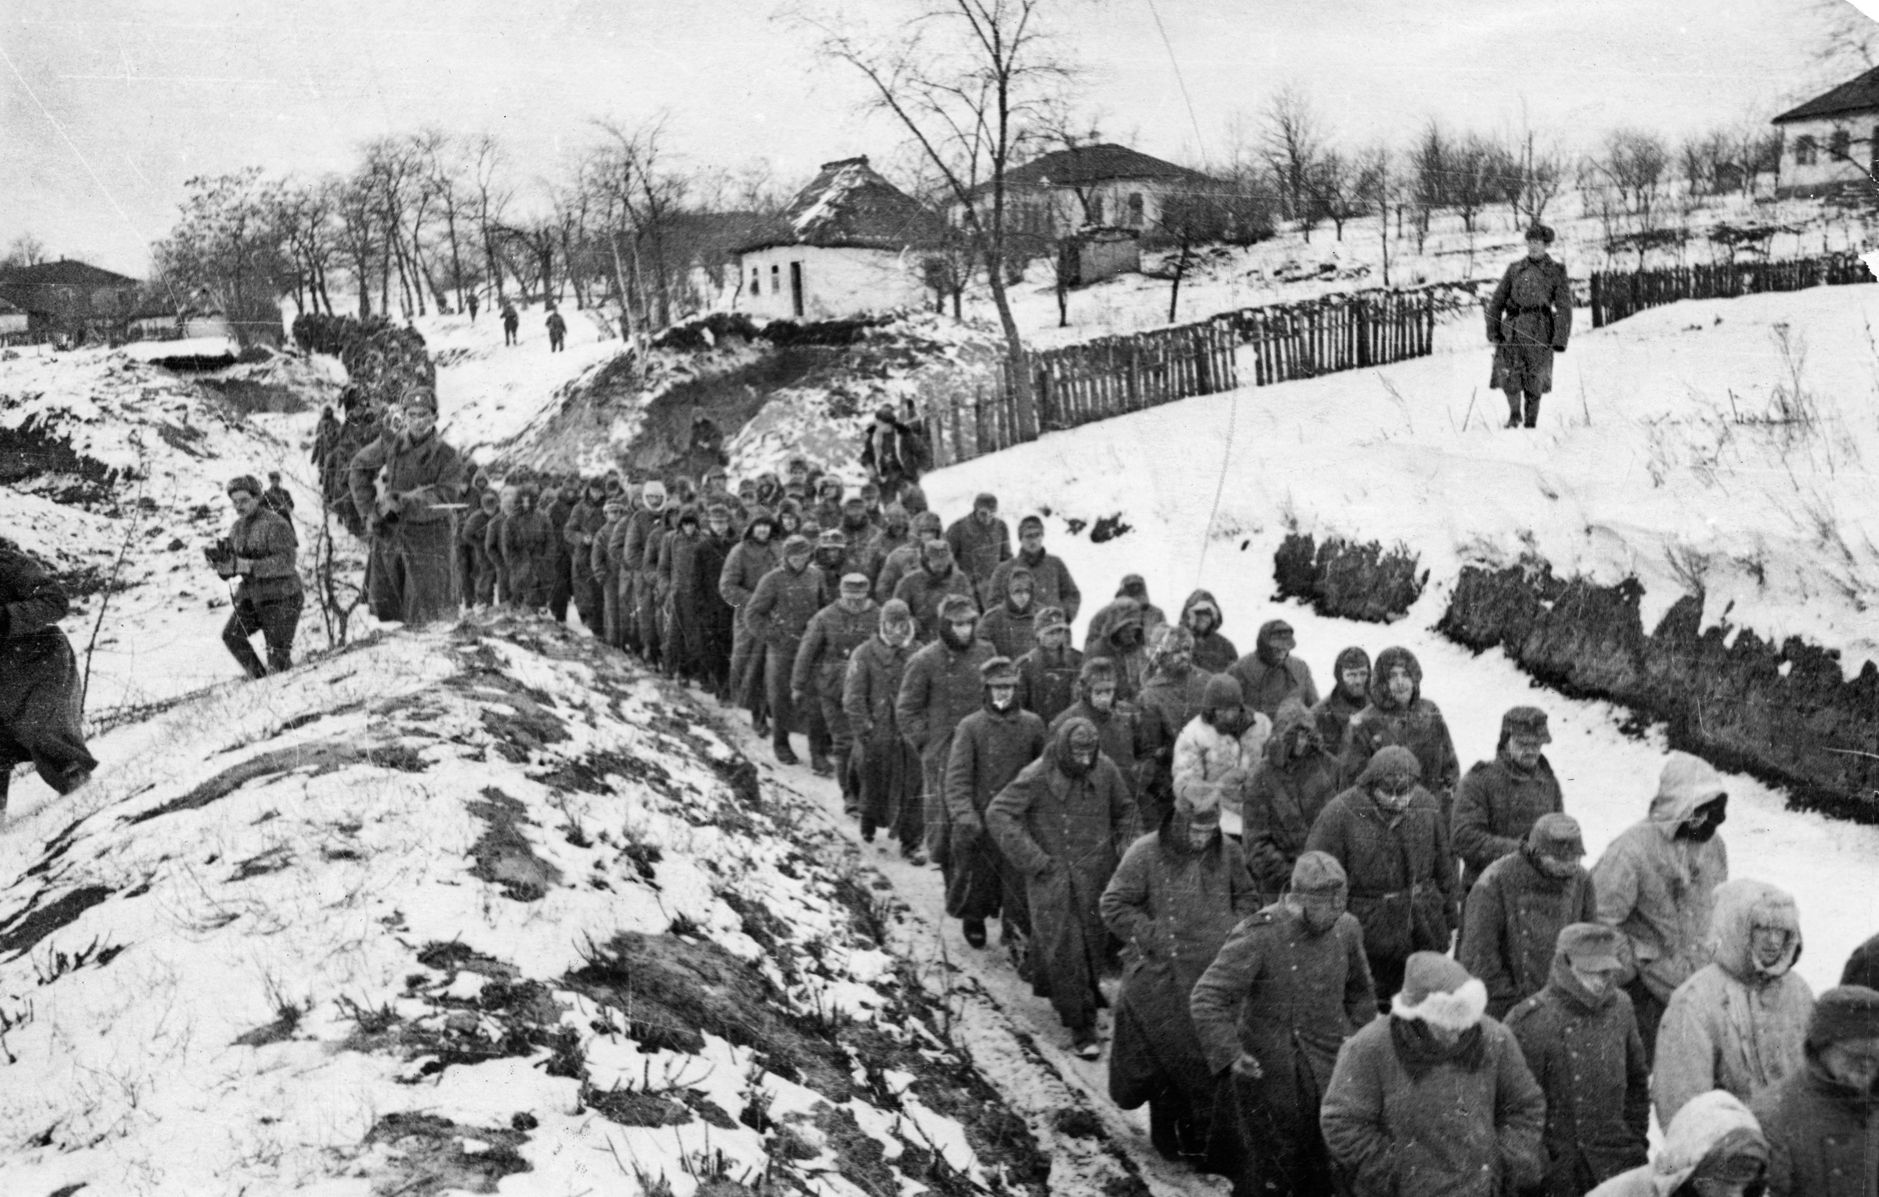 A long line of German prisoners marches into captivity in the Ukraine in February 1944. The future for these captives of the Soviets was at best uncertain. Many prisoners never returned to Germany.